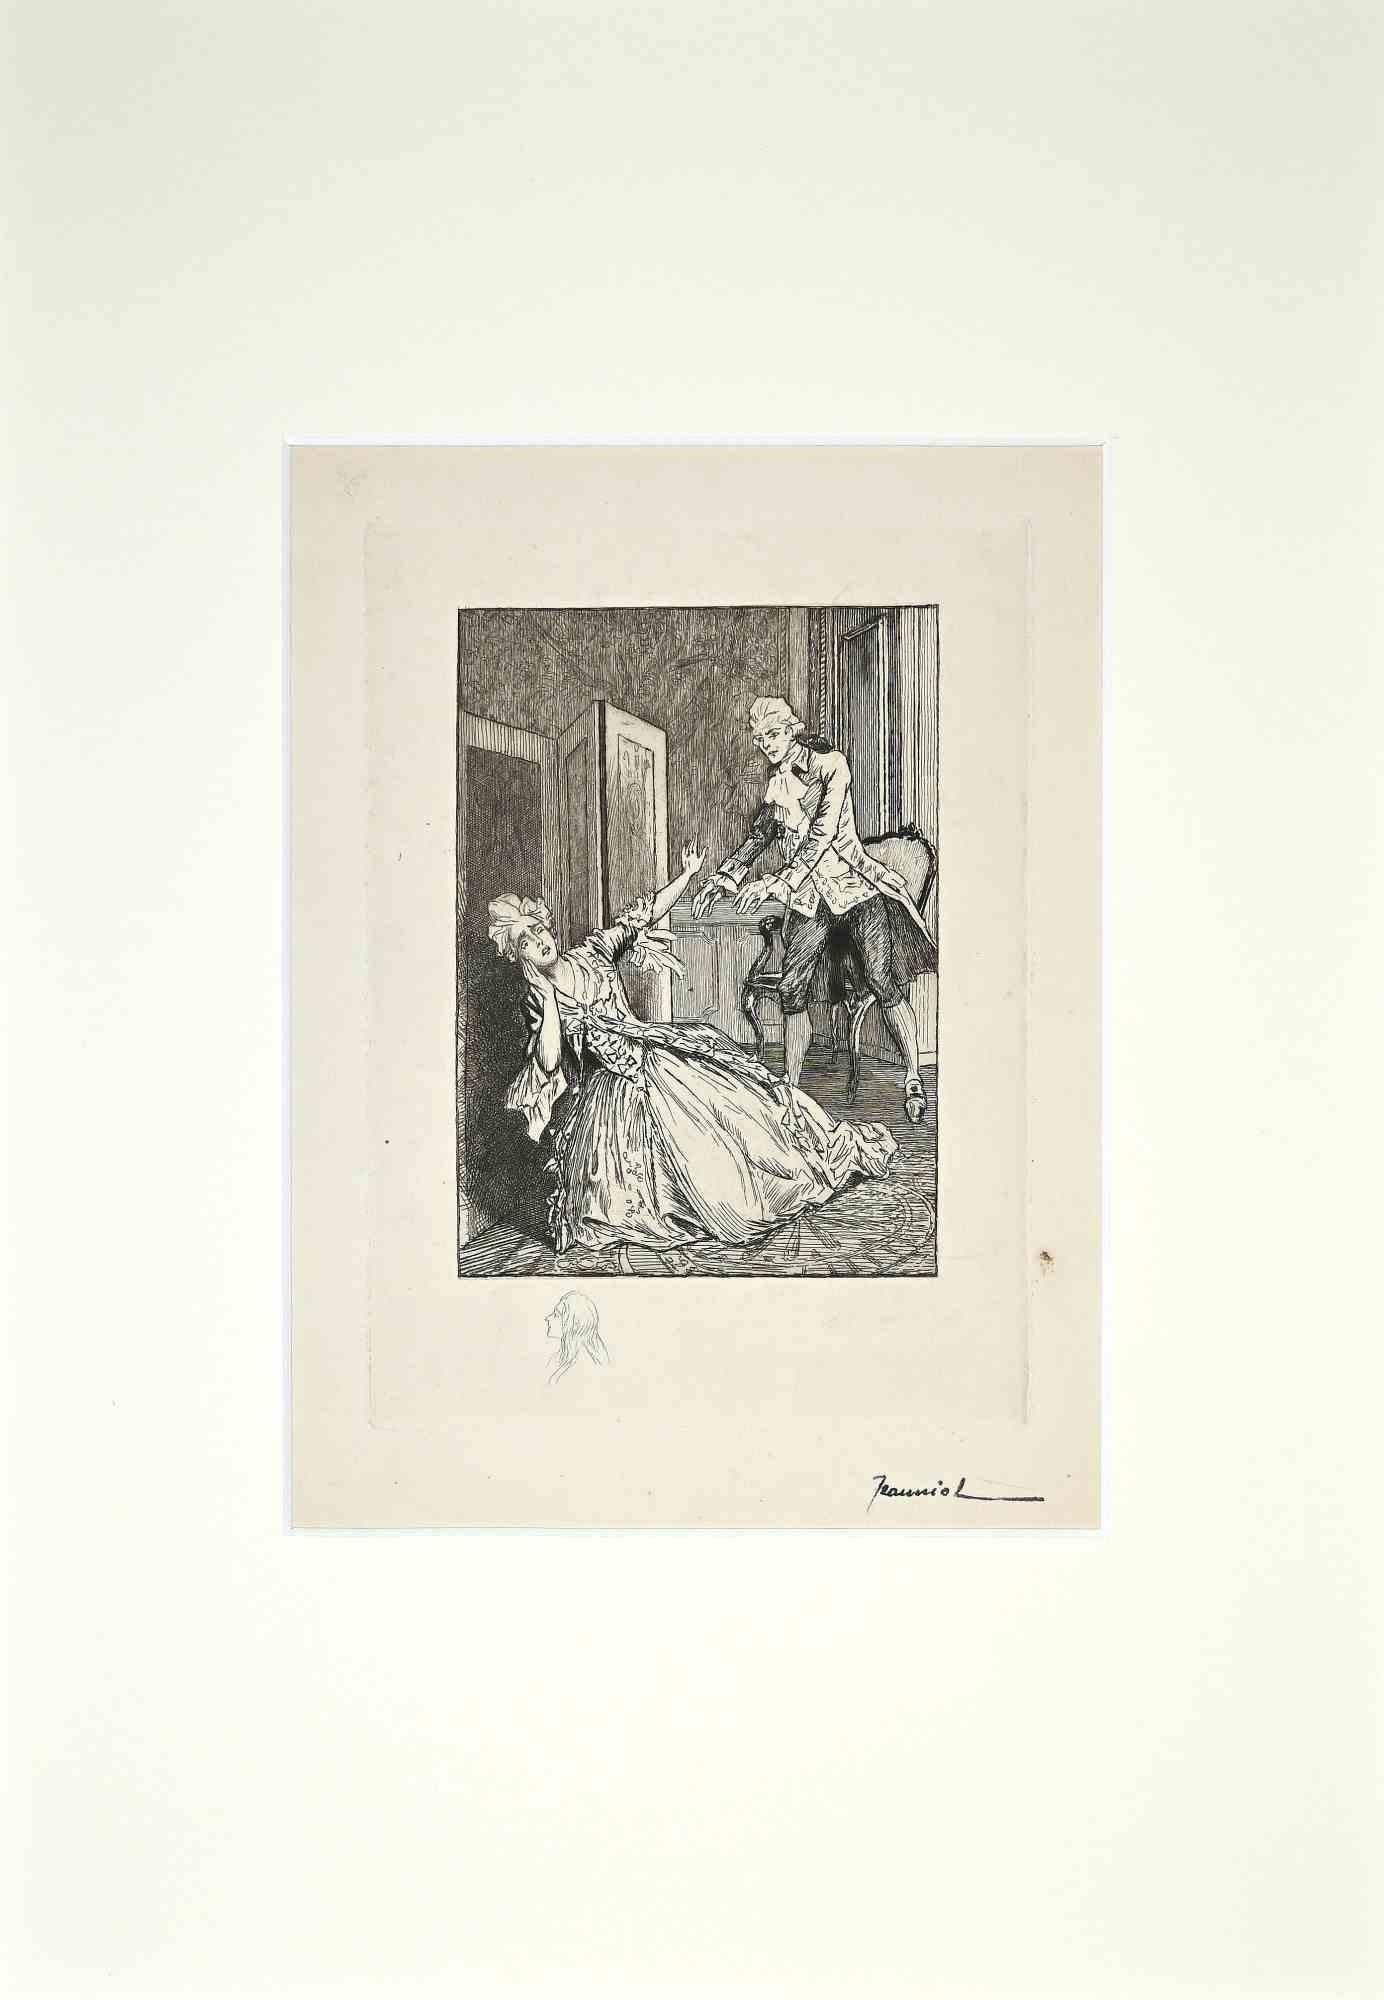 Pierre Georges Jeanniot Figurative Print - The Life of Casanova - Etching by G. Jeanniot - Early 20th Century